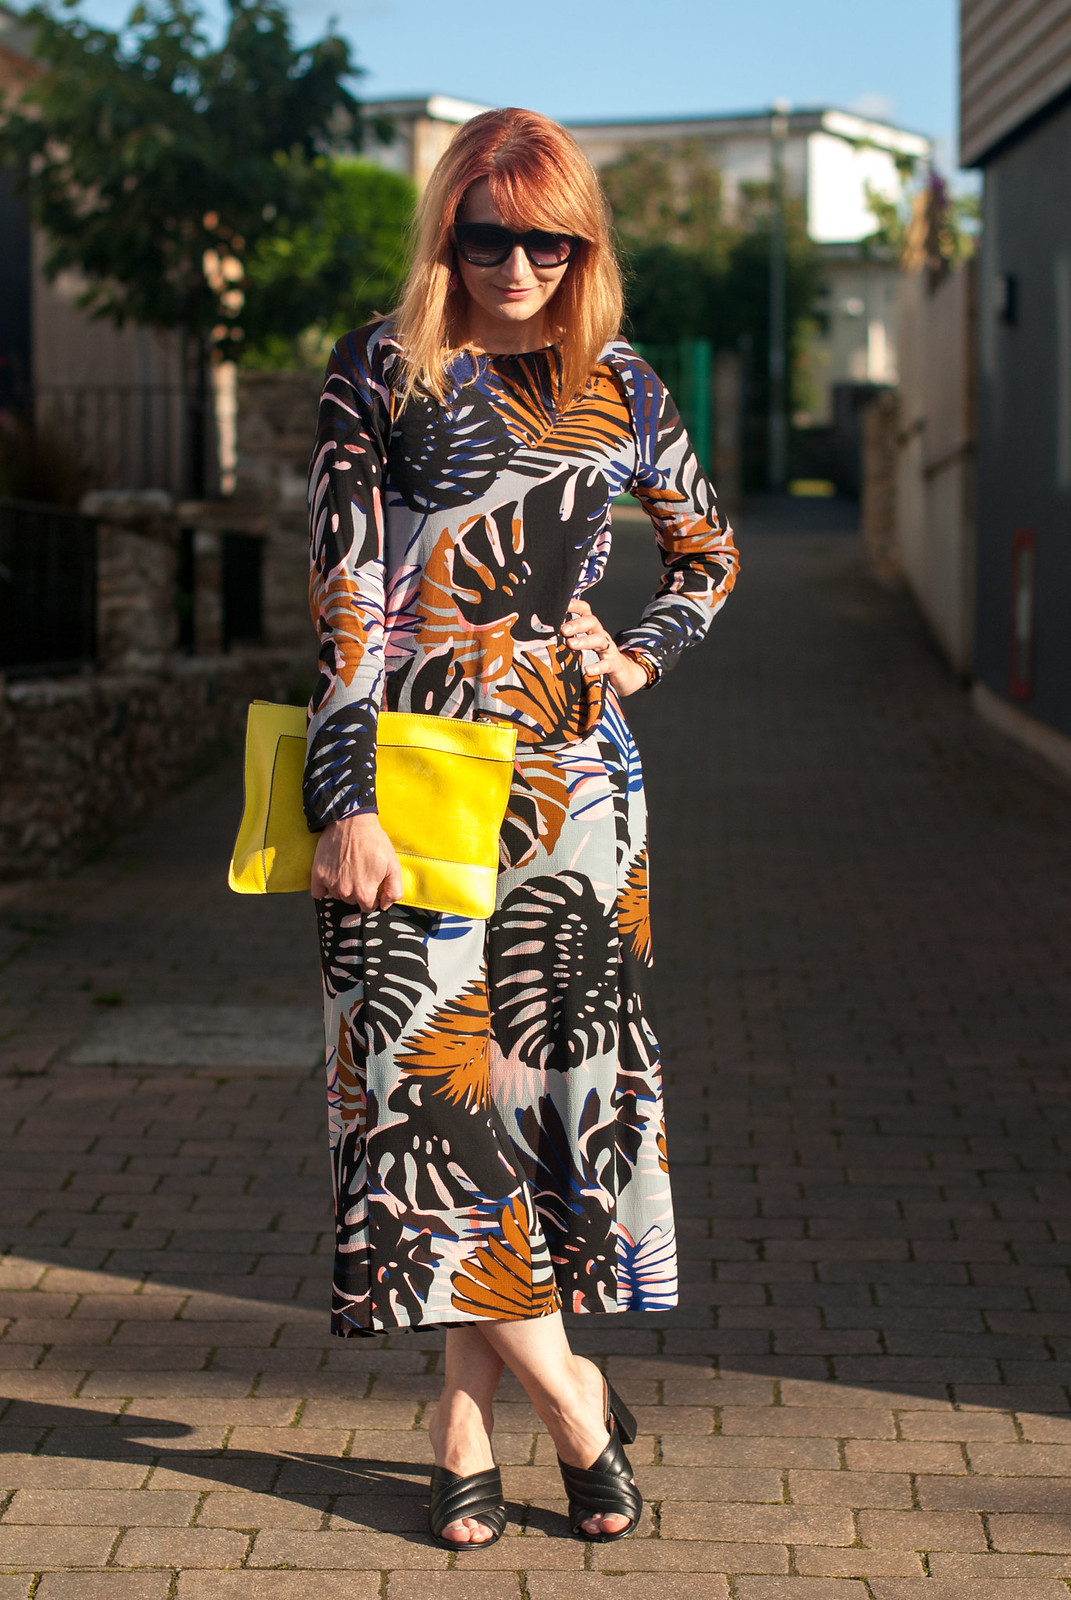 Palm print co-ords: Long sleeve top and wide leg crop trousers culottes pants yellow suede clutch bag black crossover block heel mule sandals statement oversized earrings cat eye sunglasses | Not Dressed As Lamb, over 40 style